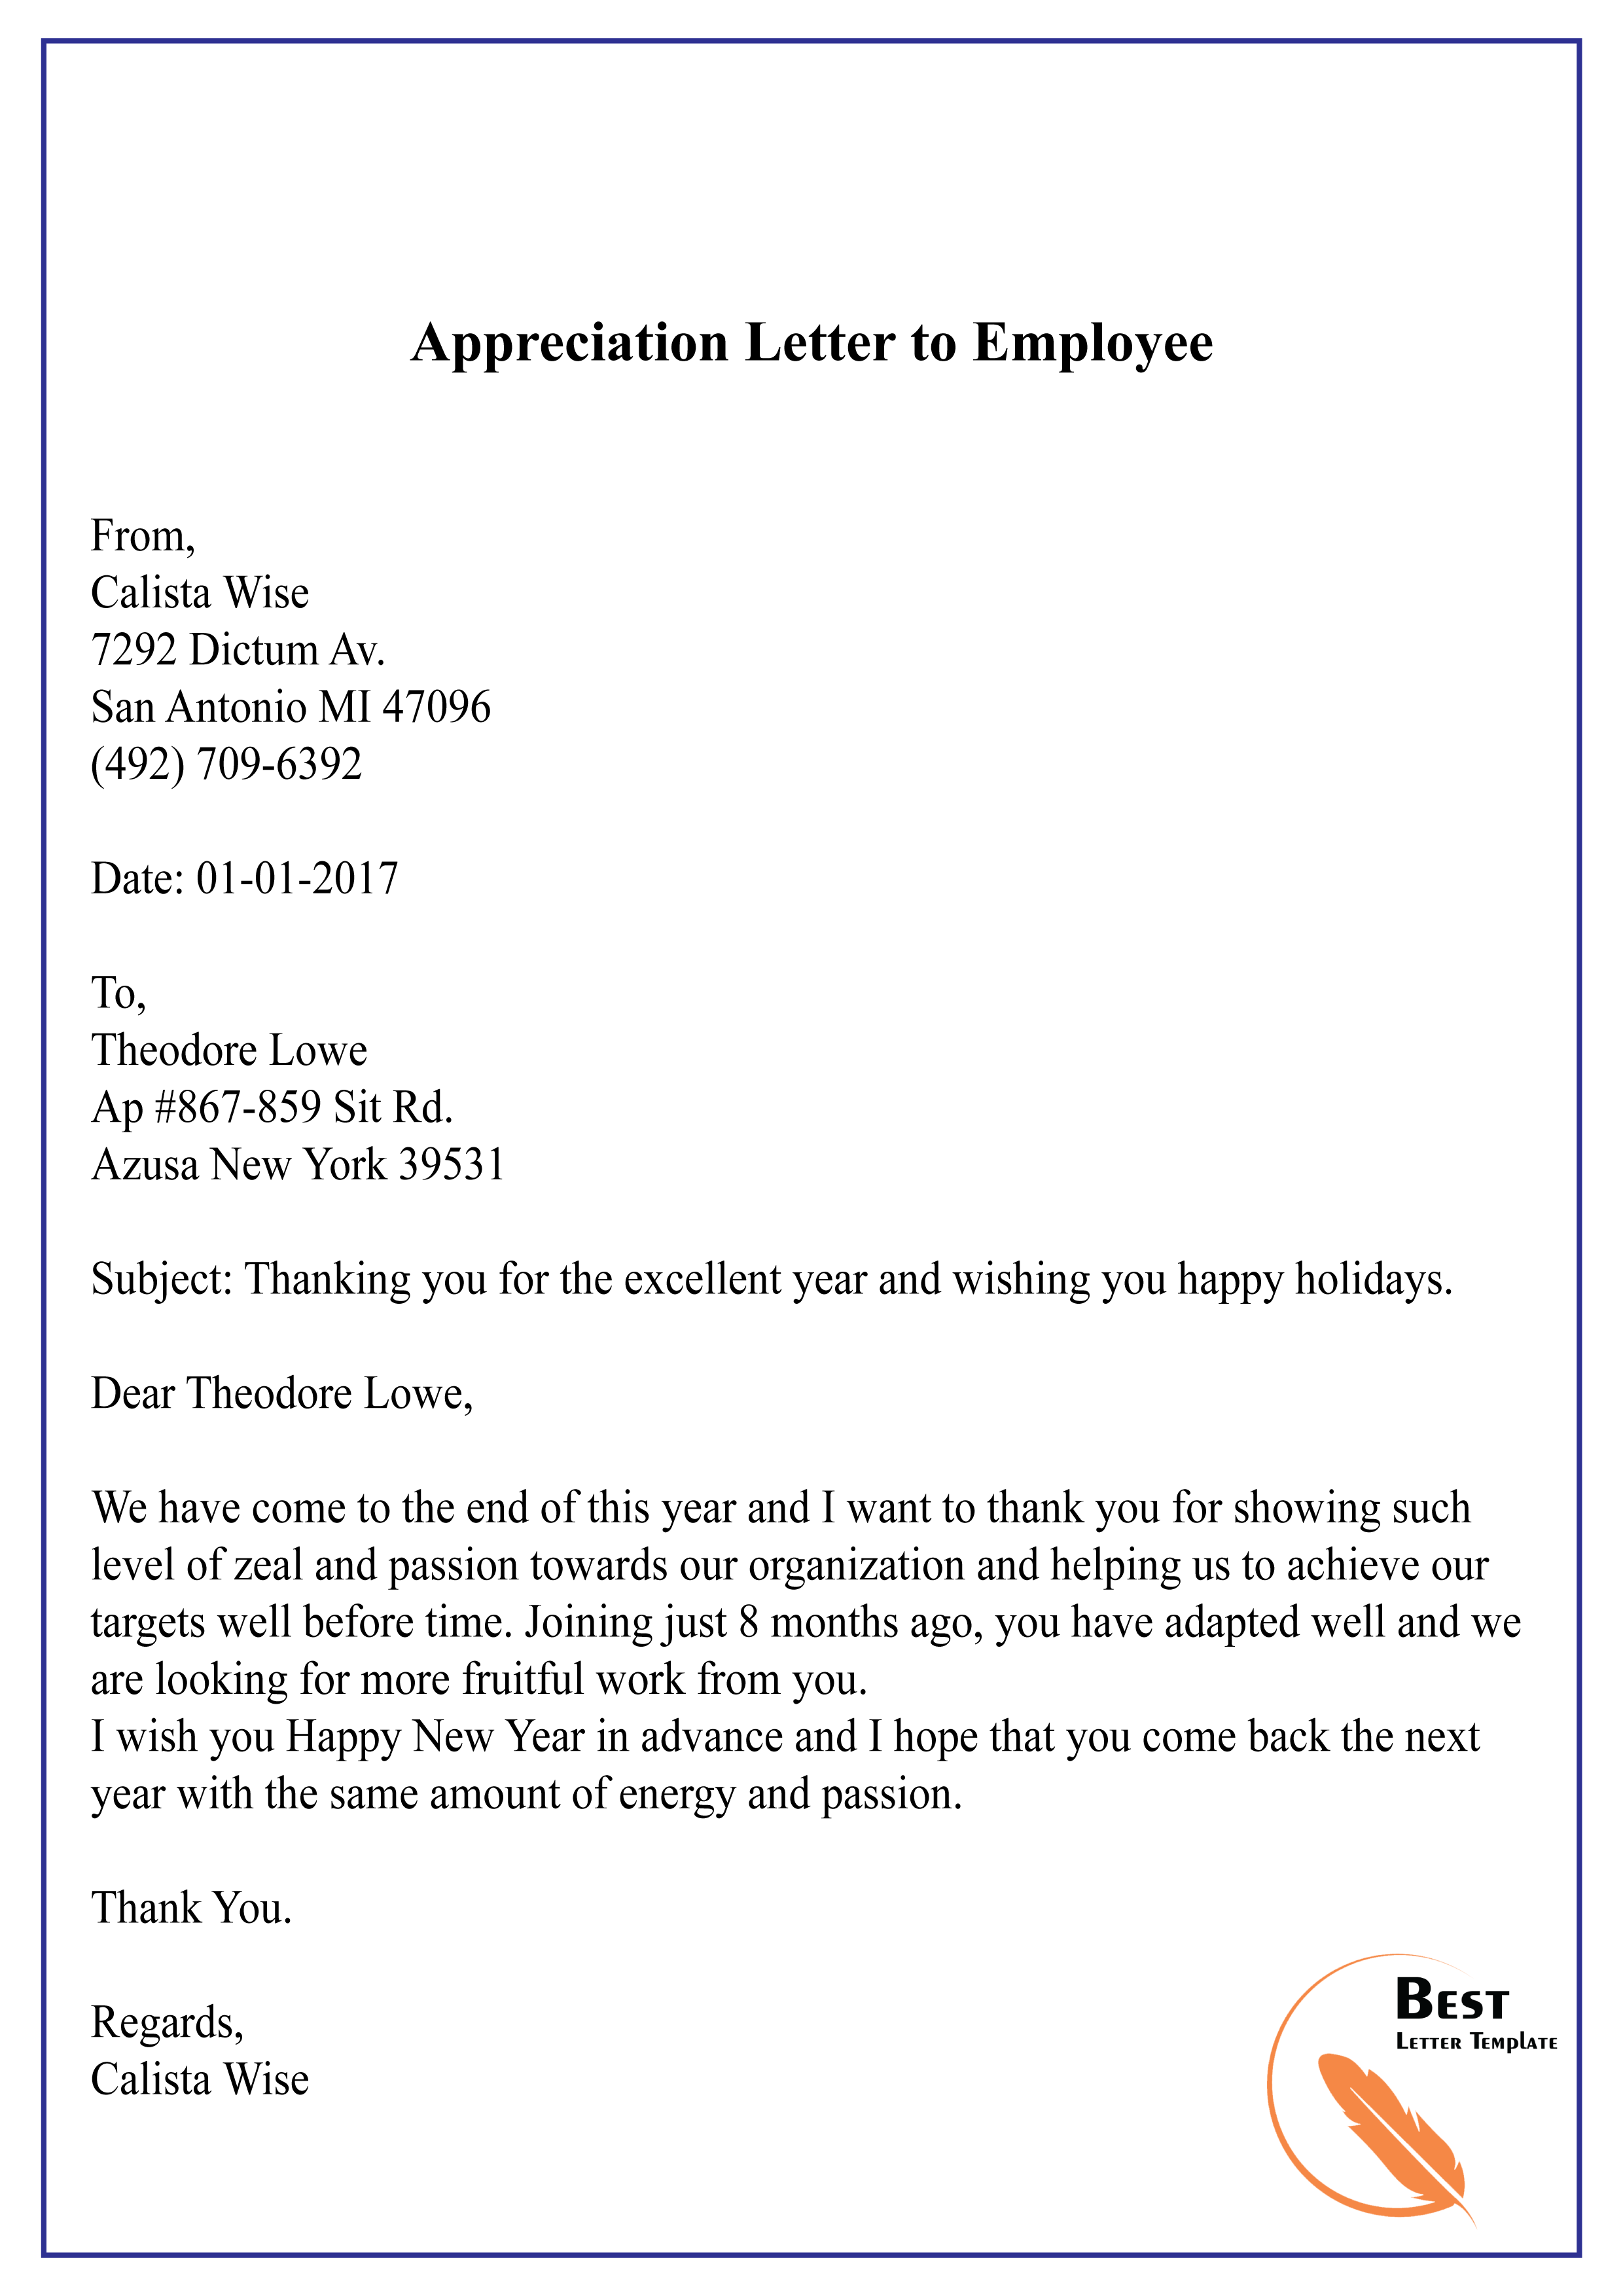 Appreciation Letter to Employee-01 – Best Letter Template